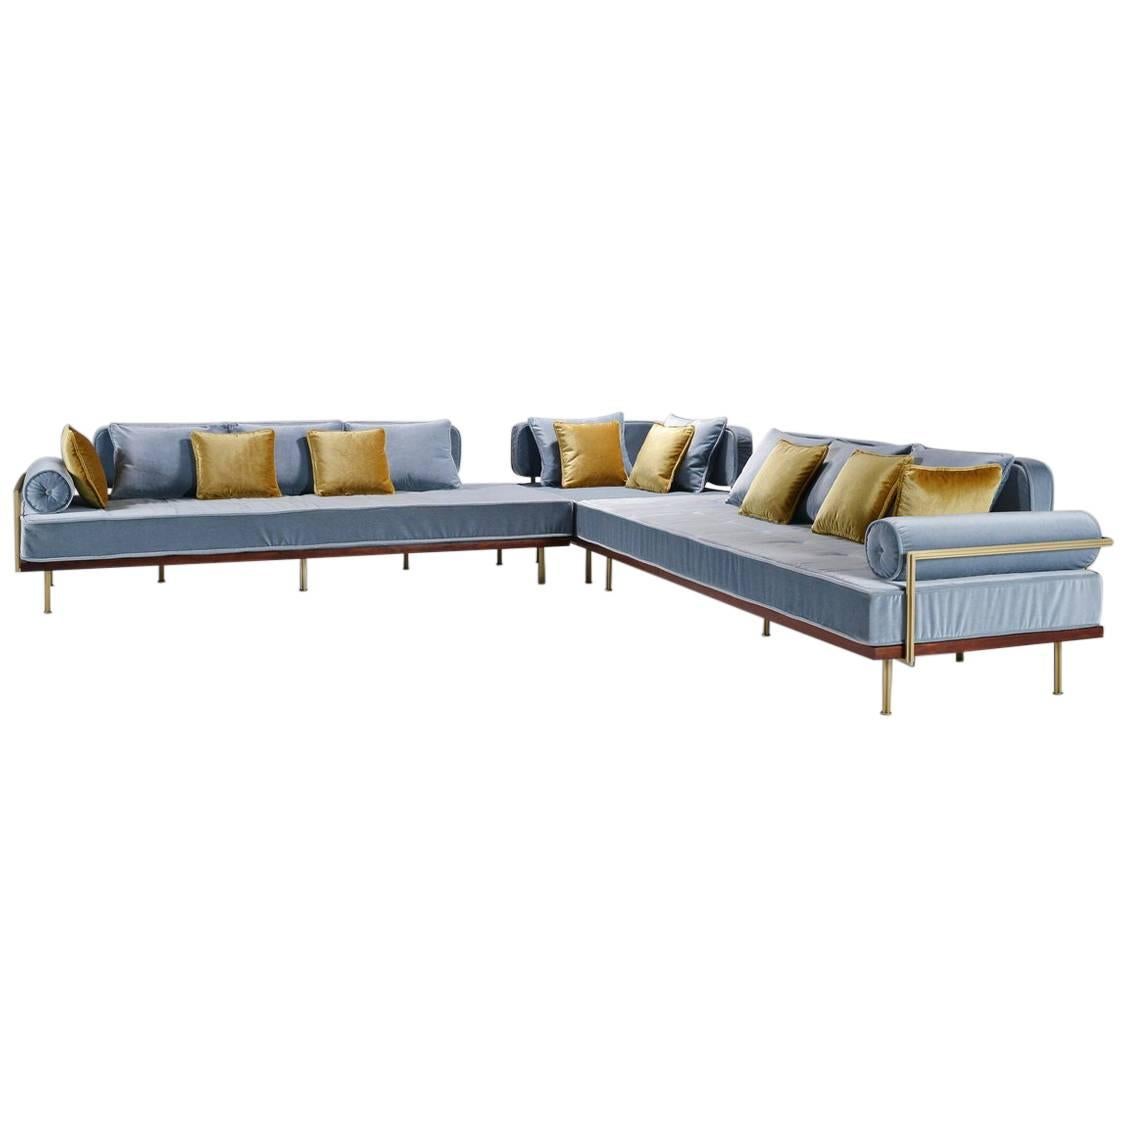 Bespoke Sectional Sofa in Brass and Reclaimed Hardwood Frame, By P. Tendercool For Sale